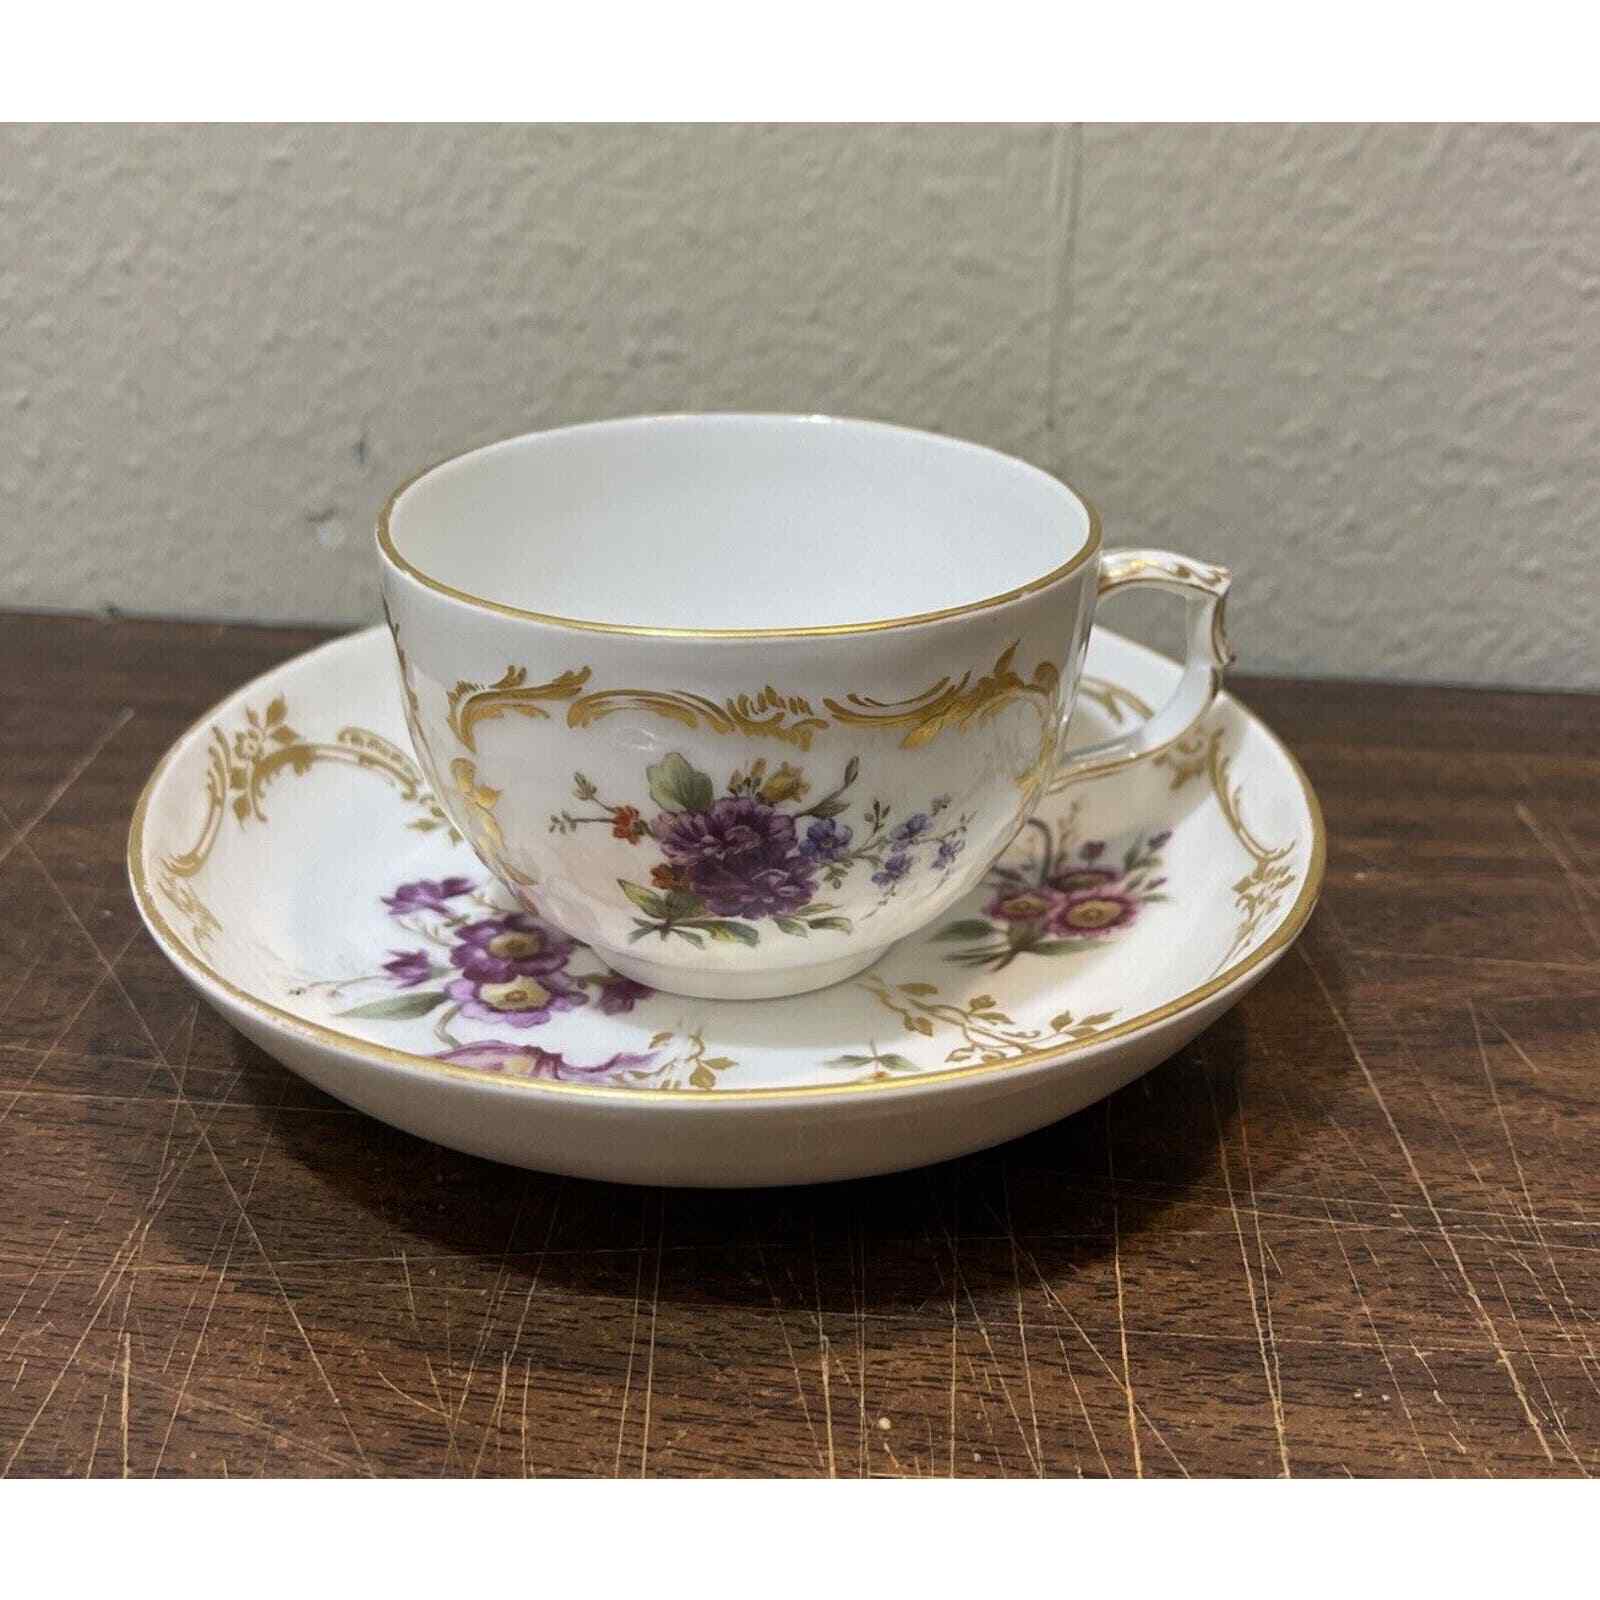 Antique Cup and Saucer German Scepter Mark KPM?